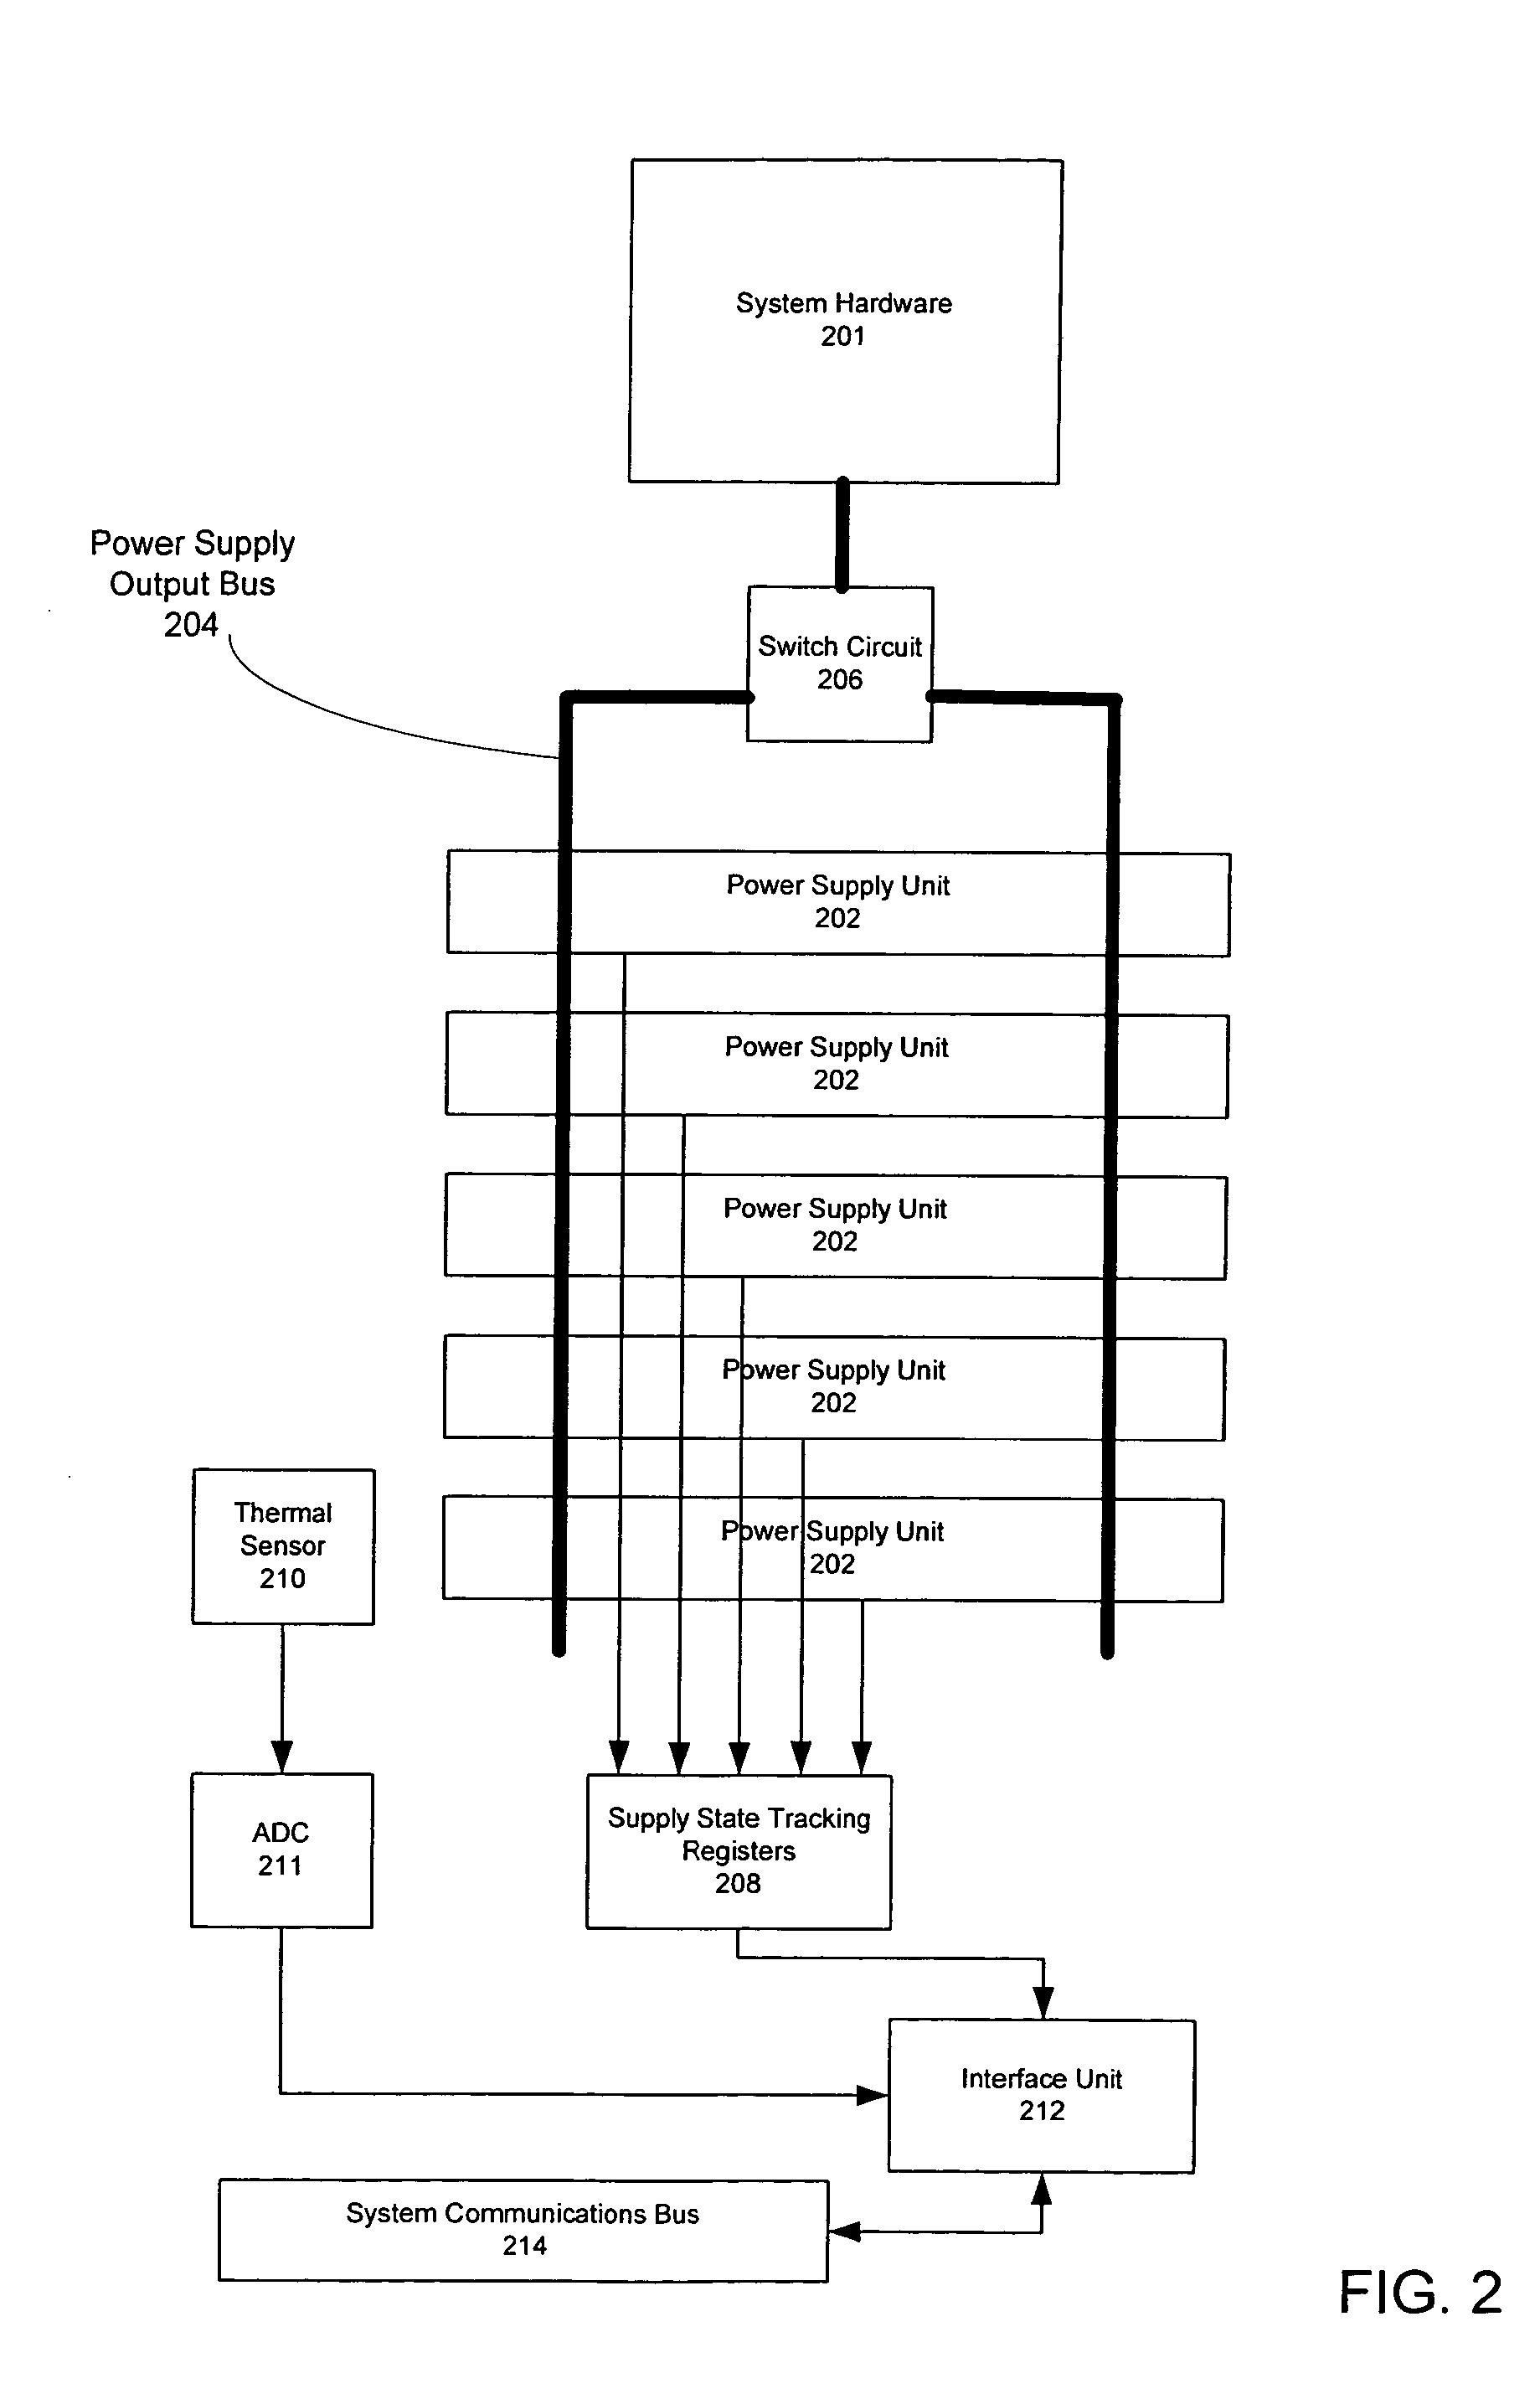 Method for determining number of dynamically temperature-adjusted power supply units needed to supply power according to measure operating temperature of power supply units